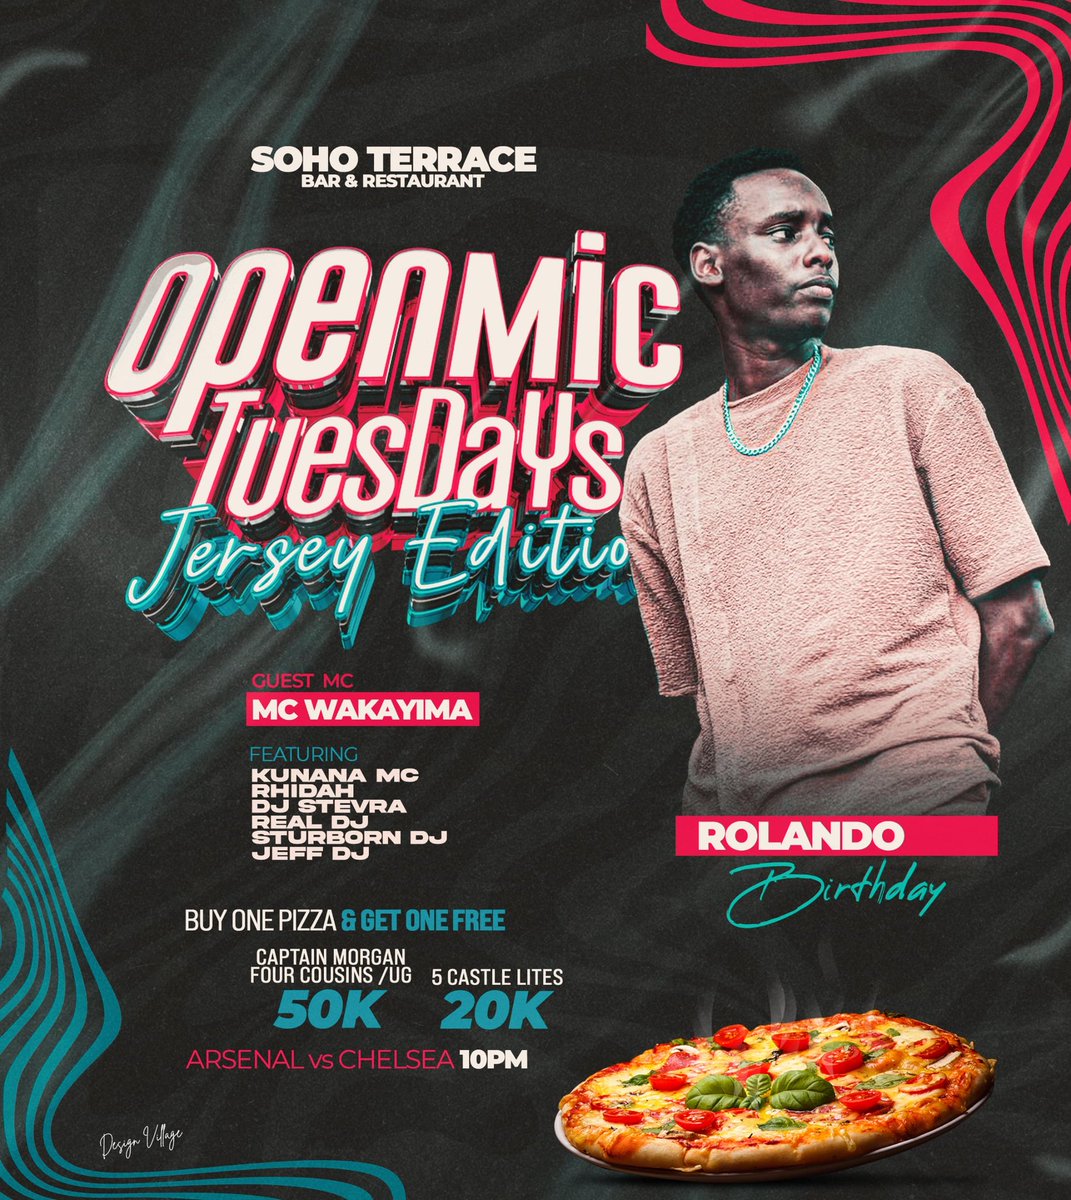 Come tonight at Soho Terrace let's celebrate Rolando's birthday together #OpenMicKaraoke